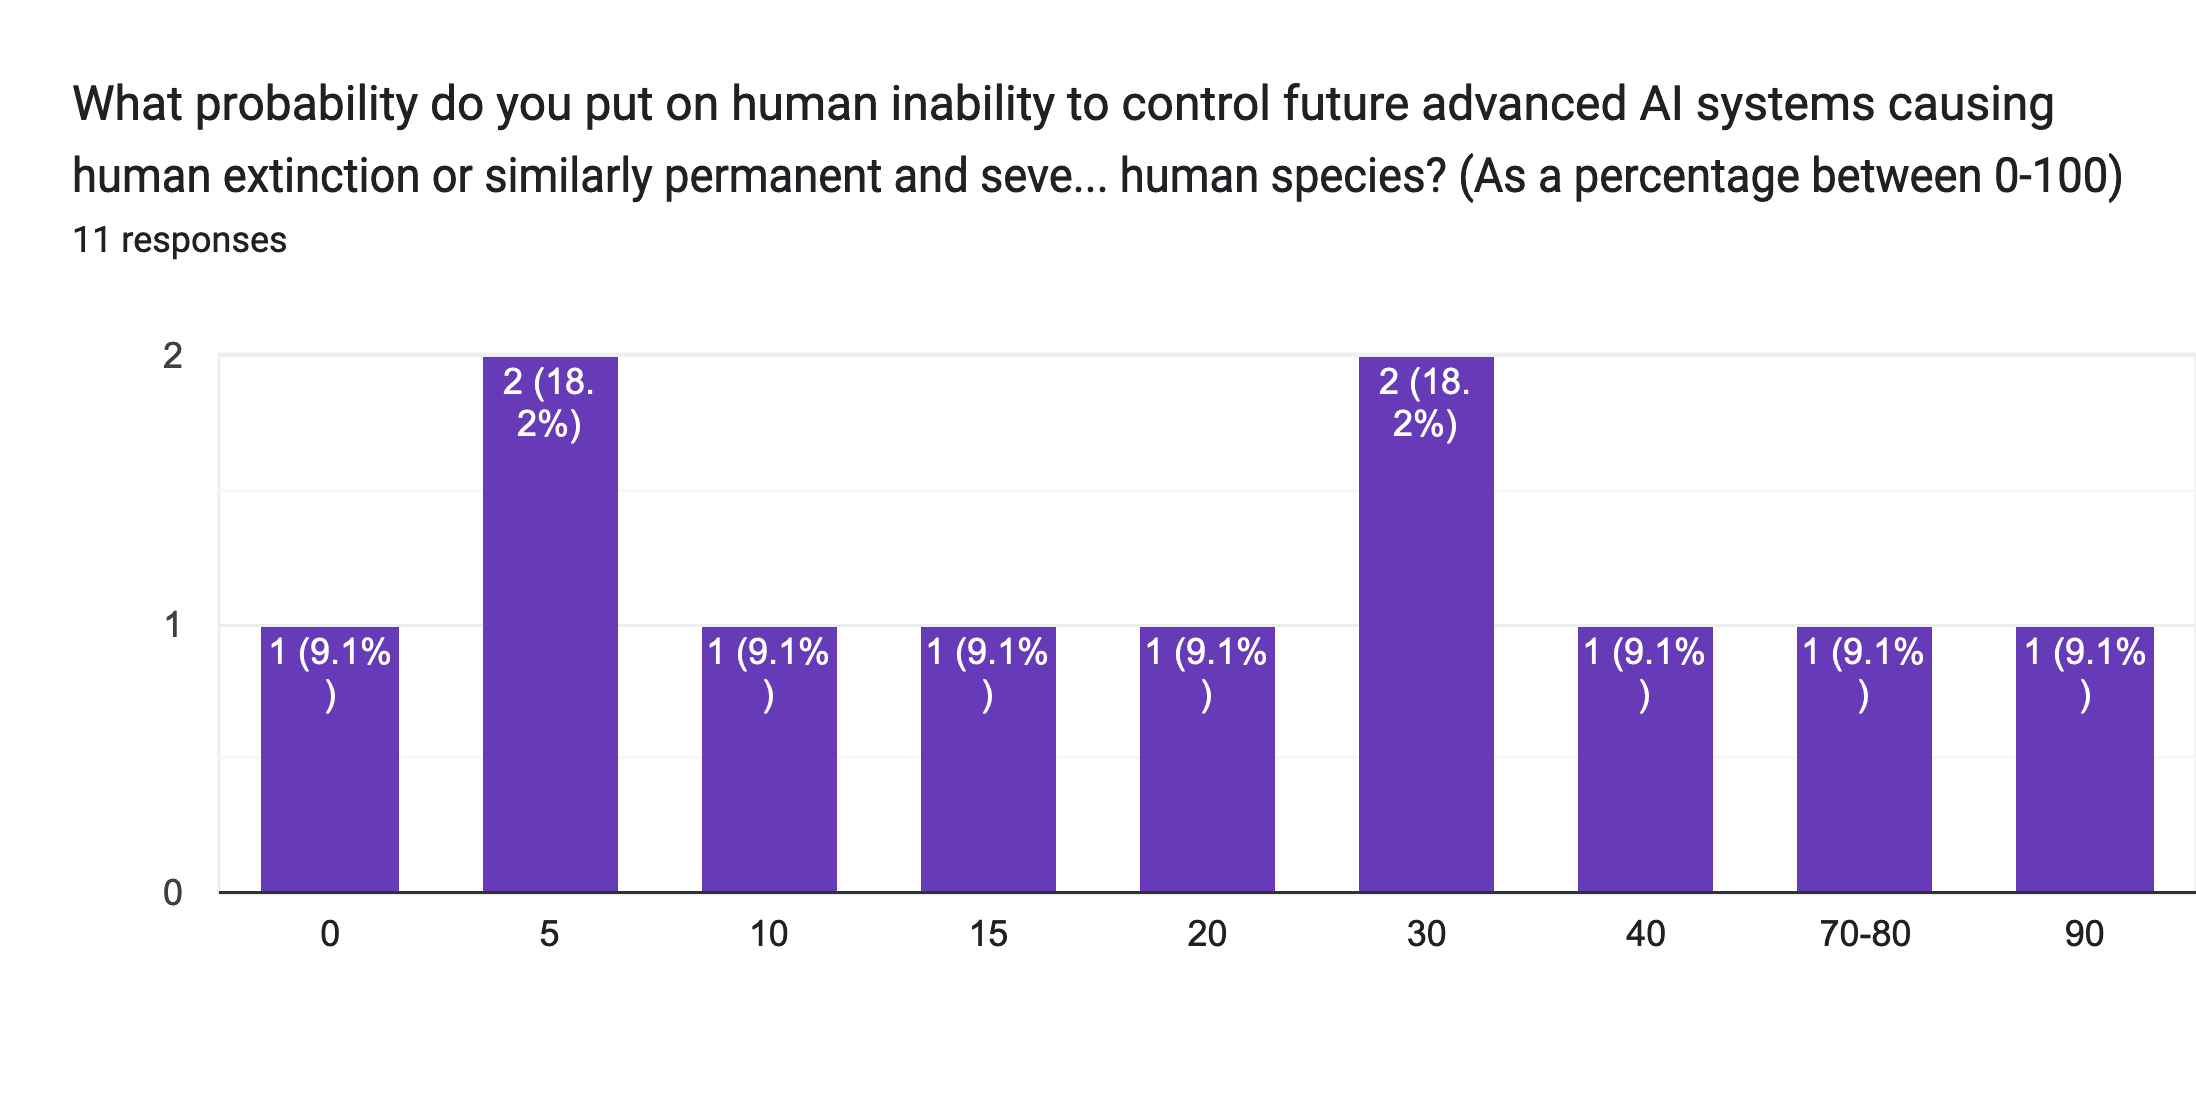 Forms response chart. Question title: What probability do you put on human inability to control future advanced AI systems causing human extinction or similarly permanent and severe disempowerment of the human species? (As a percentage between 0-100). Number of responses: 11 responses.